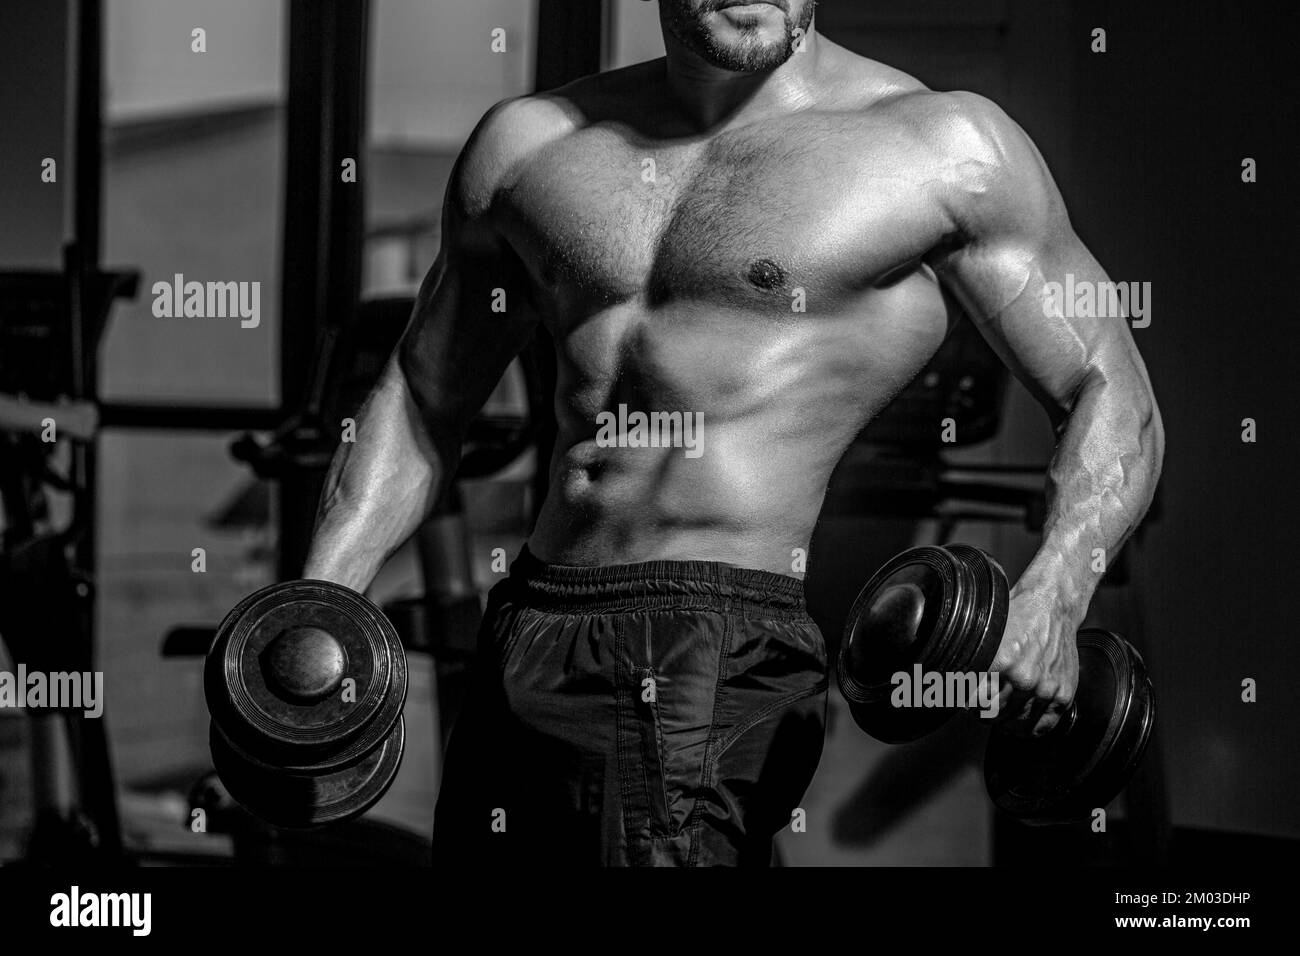 Dumbbells man gym Black and White Stock Photos & Images - Alamy